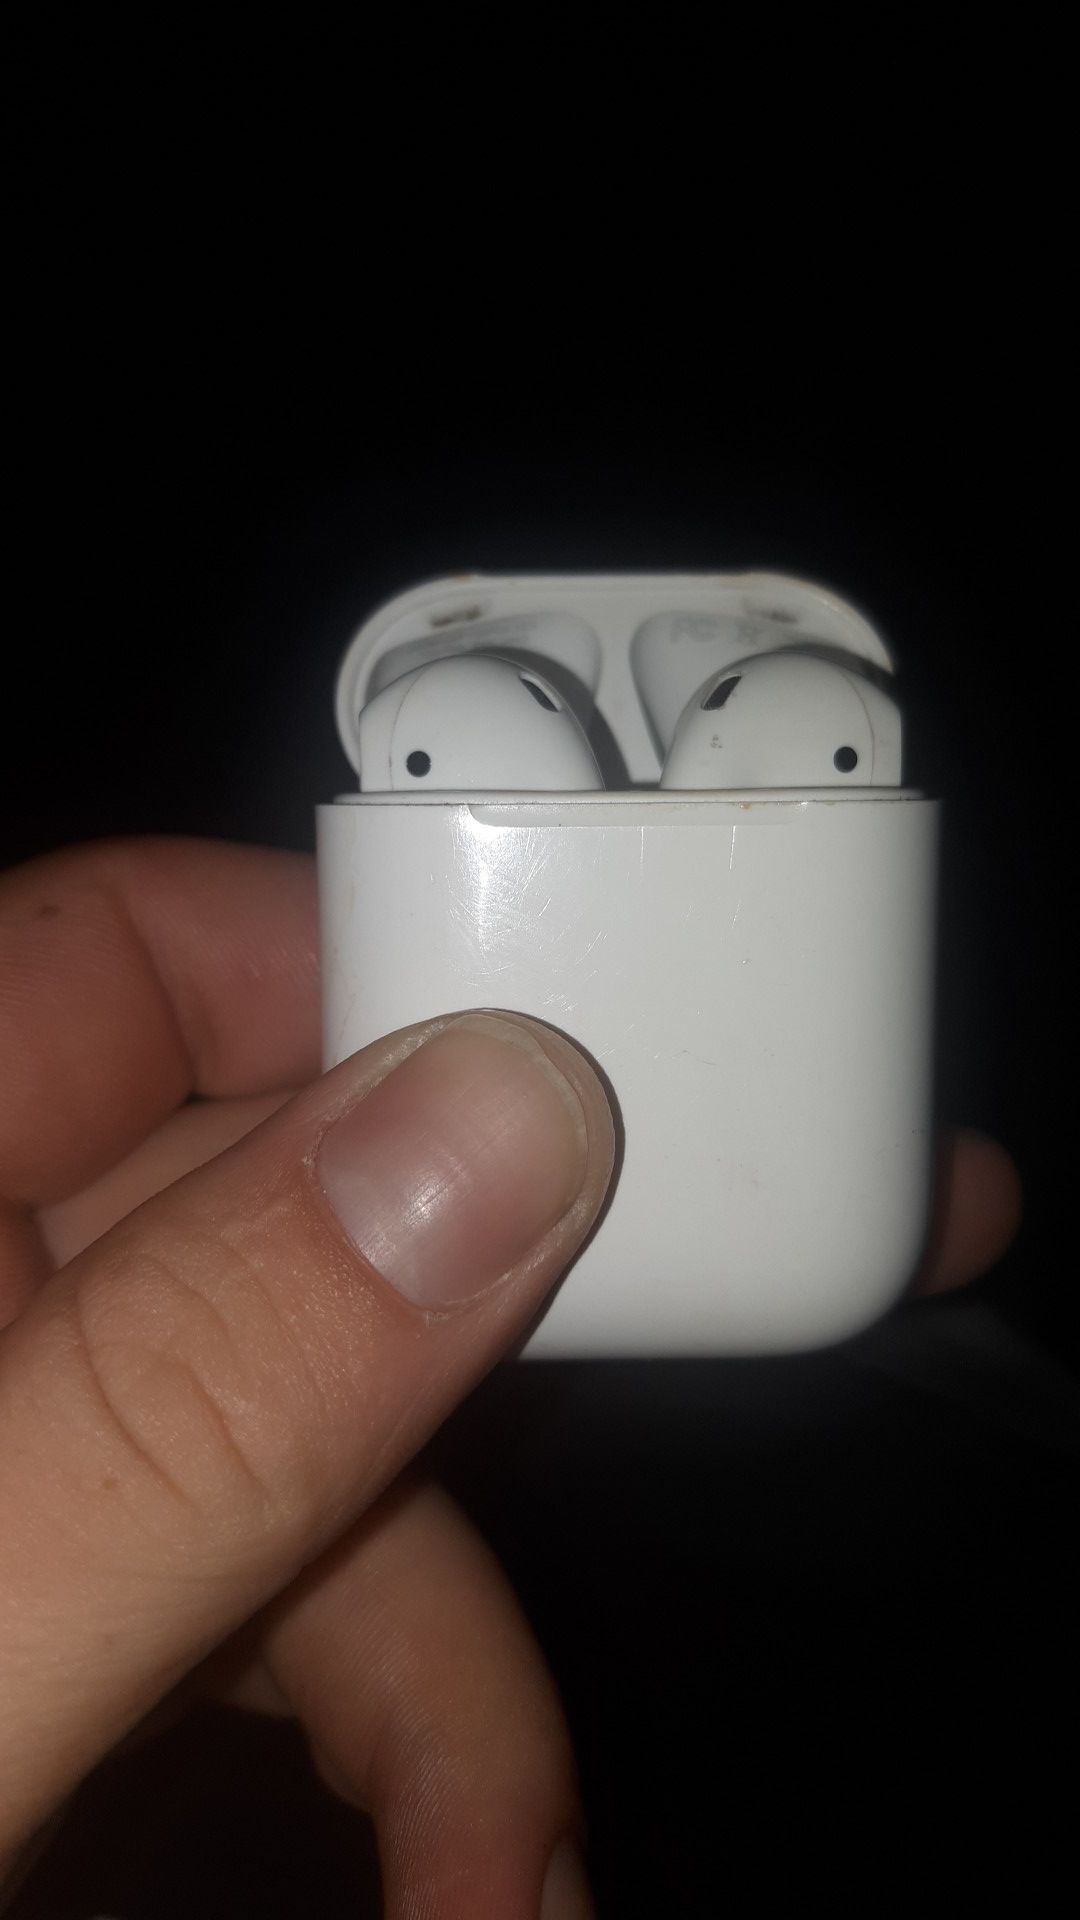 Apple Air Pods buy now for fat deal!